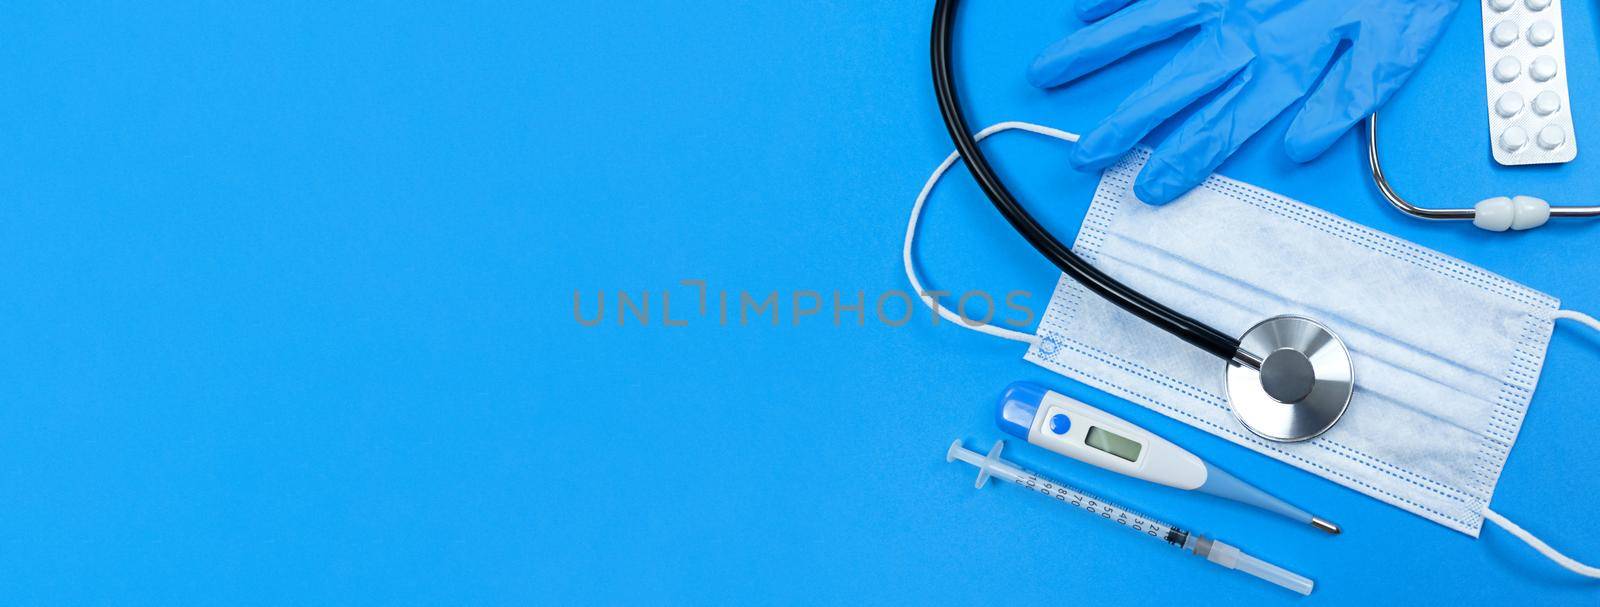 Stethoscope, face mask, medical syringe, thermometer, pills blister and medical gloves on a blue background. Flat lay banner with copy space.